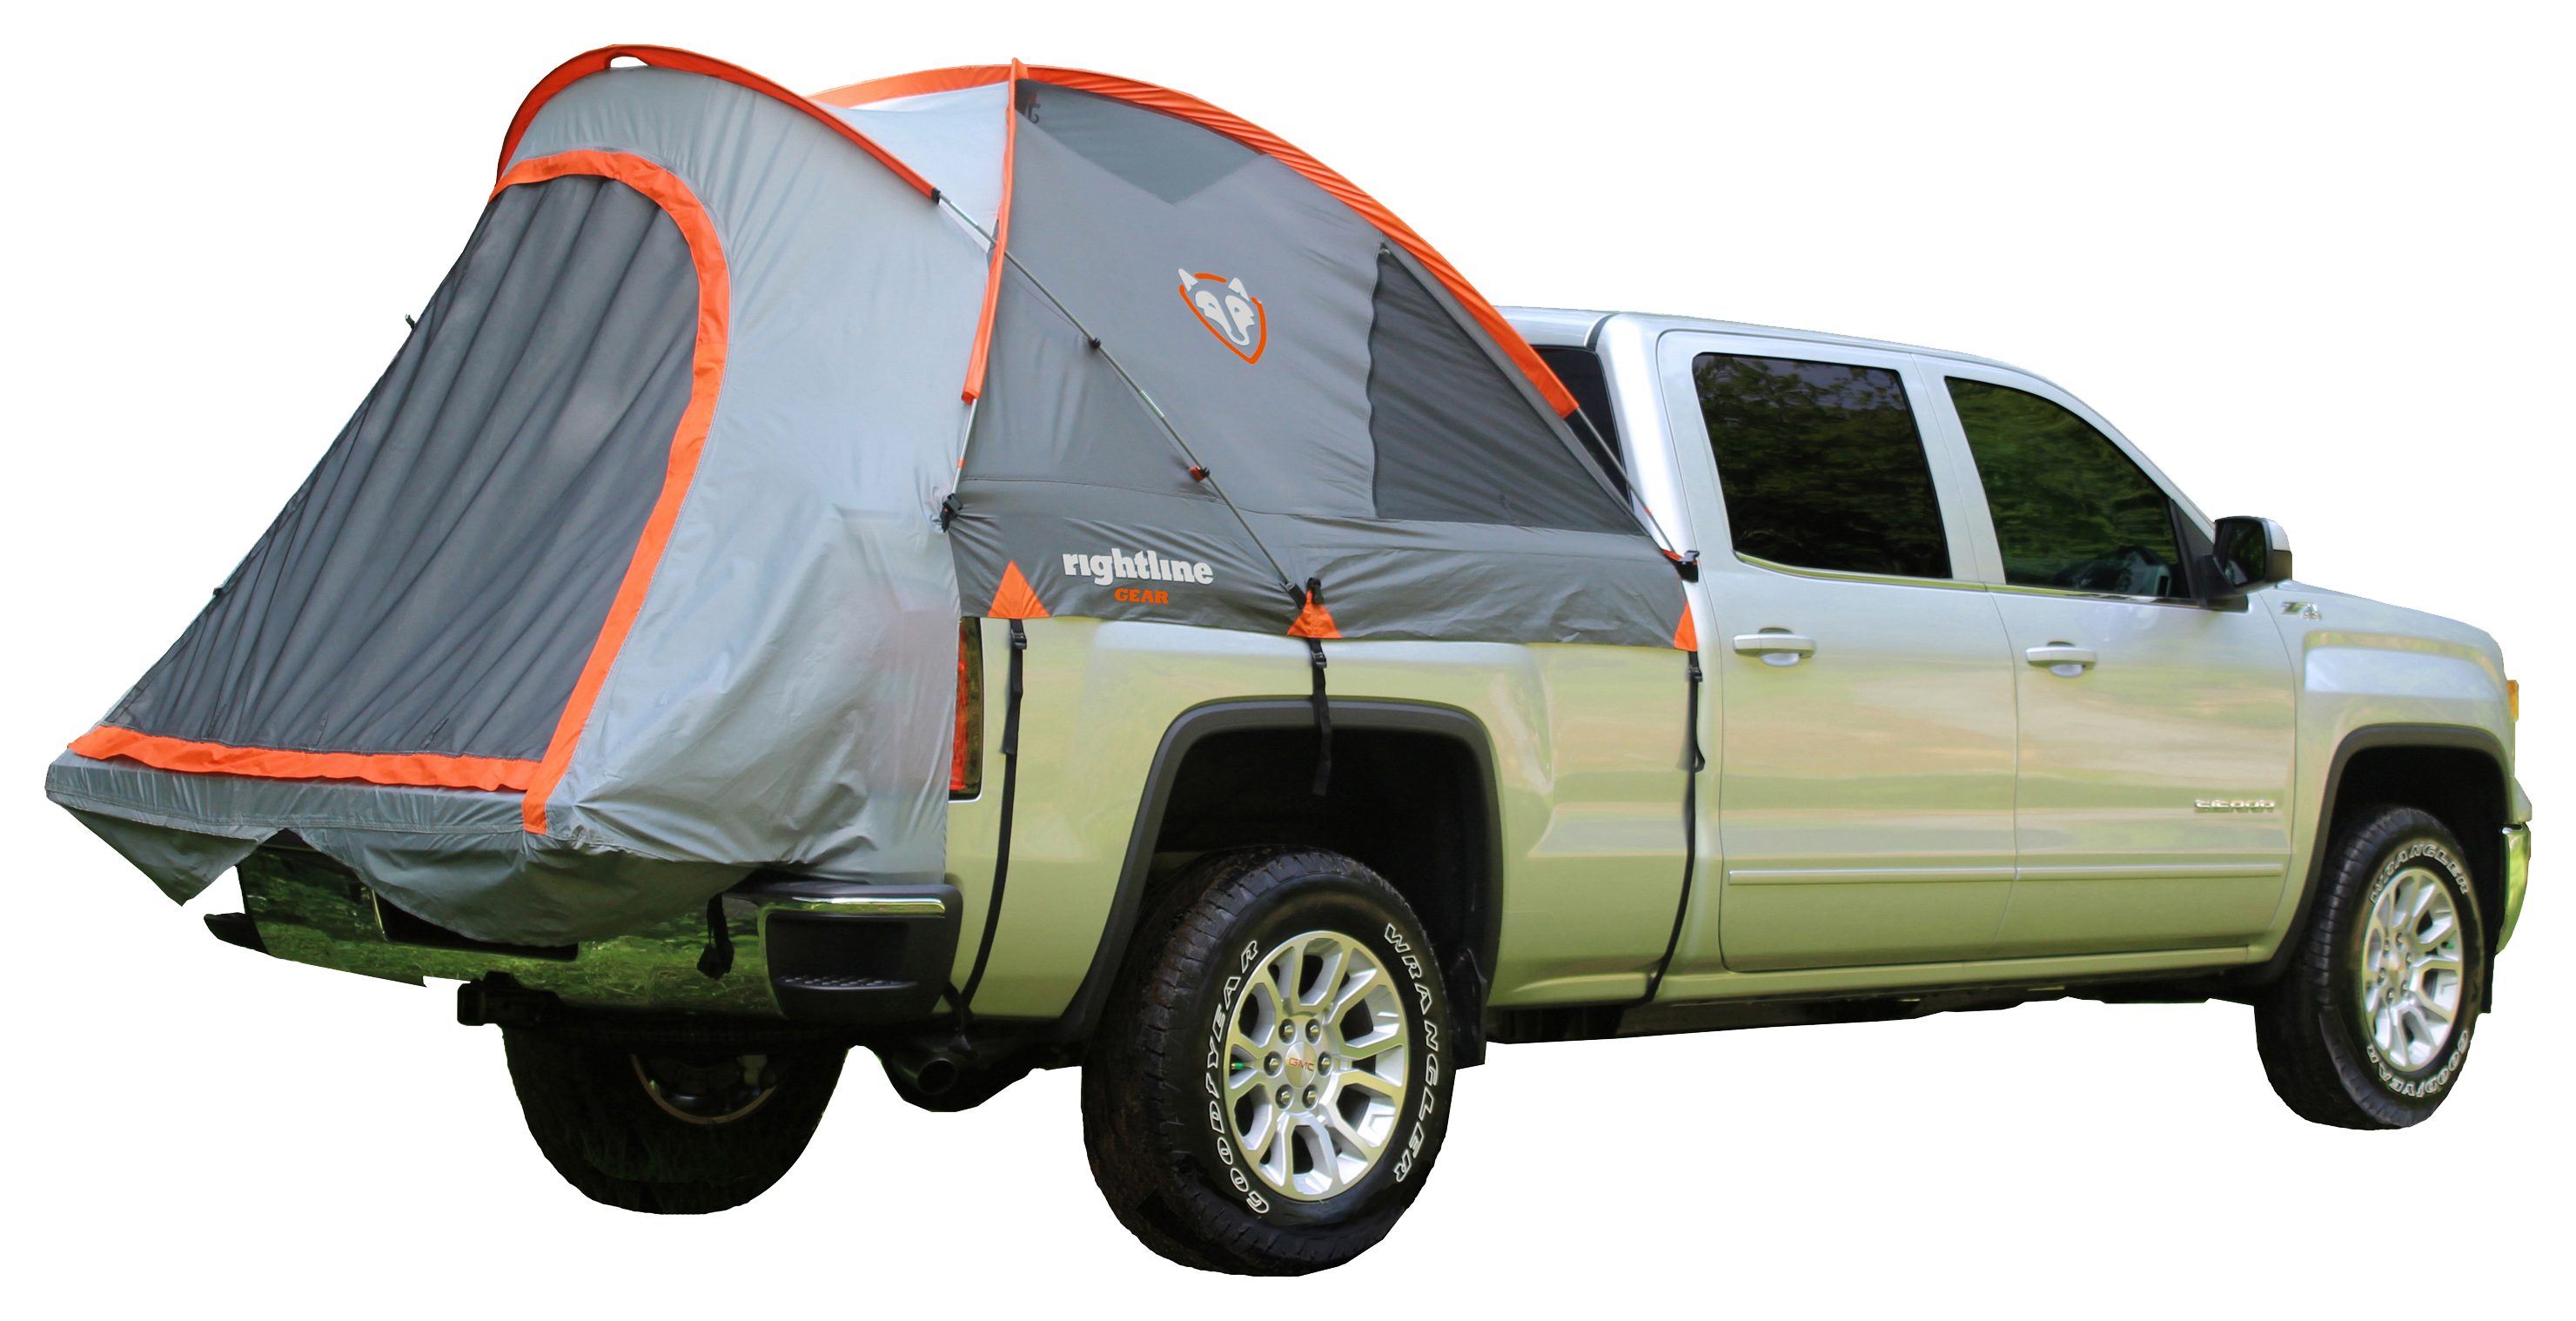 Rightline Gear 2-Person Truck Tent - 8' Full-Size Long Bed